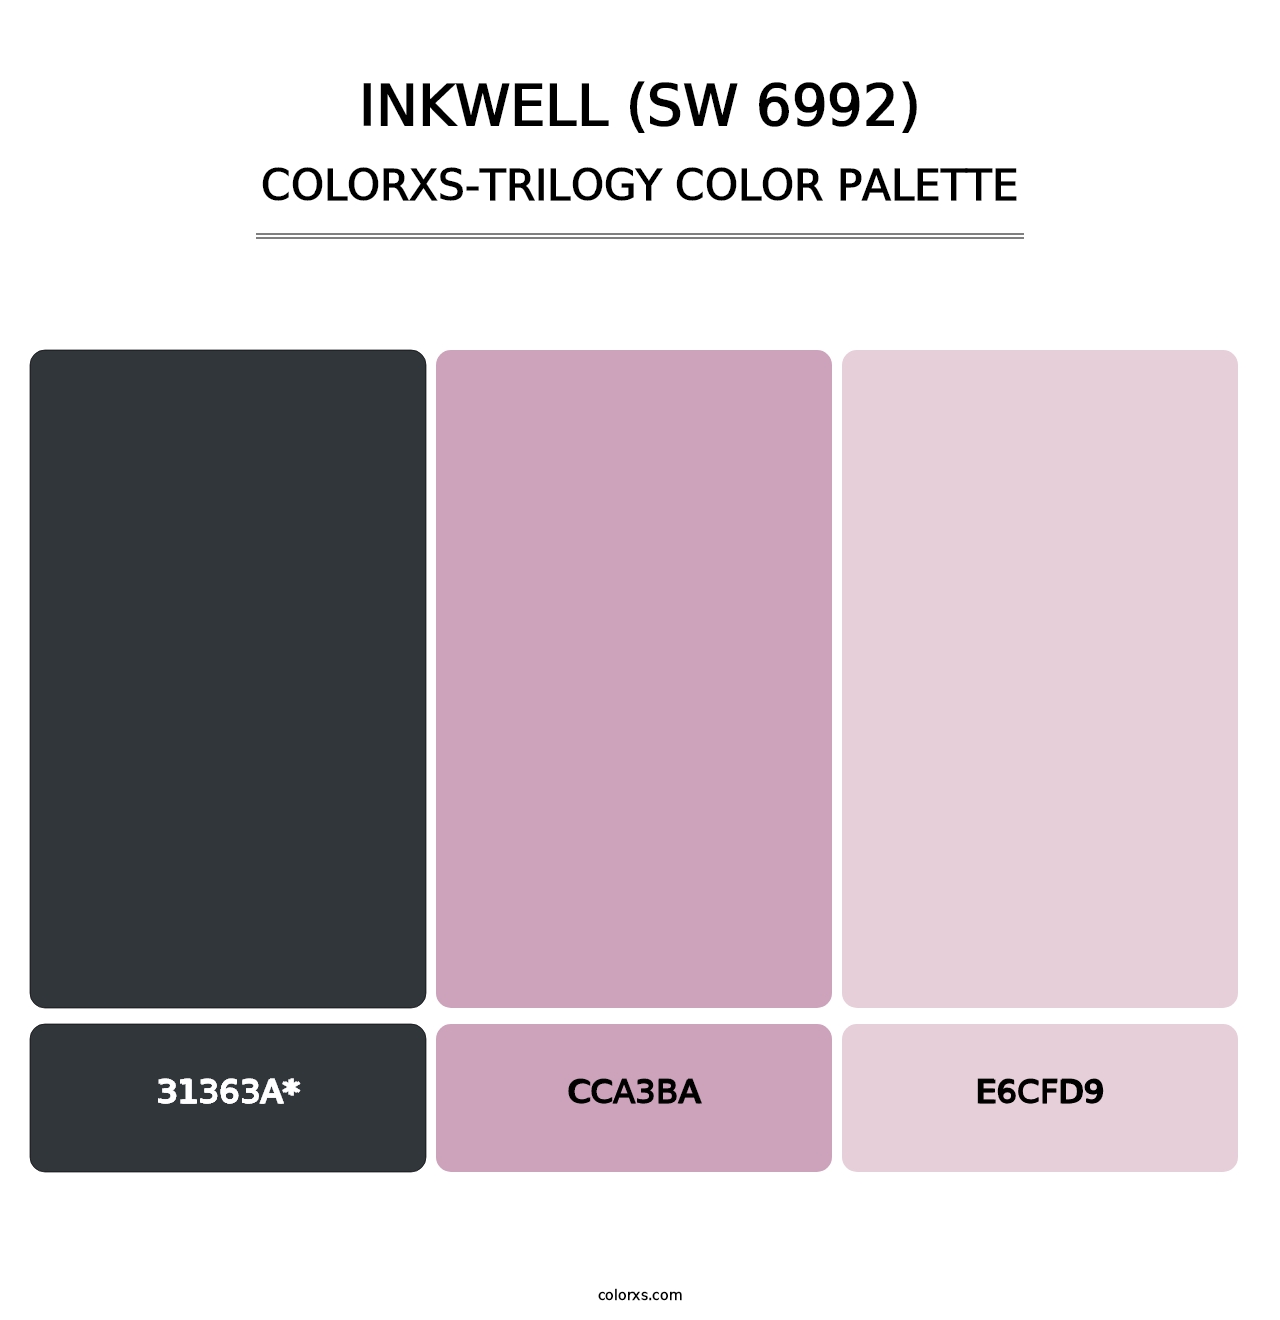 Inkwell (SW 6992) - Colorxs Trilogy Palette